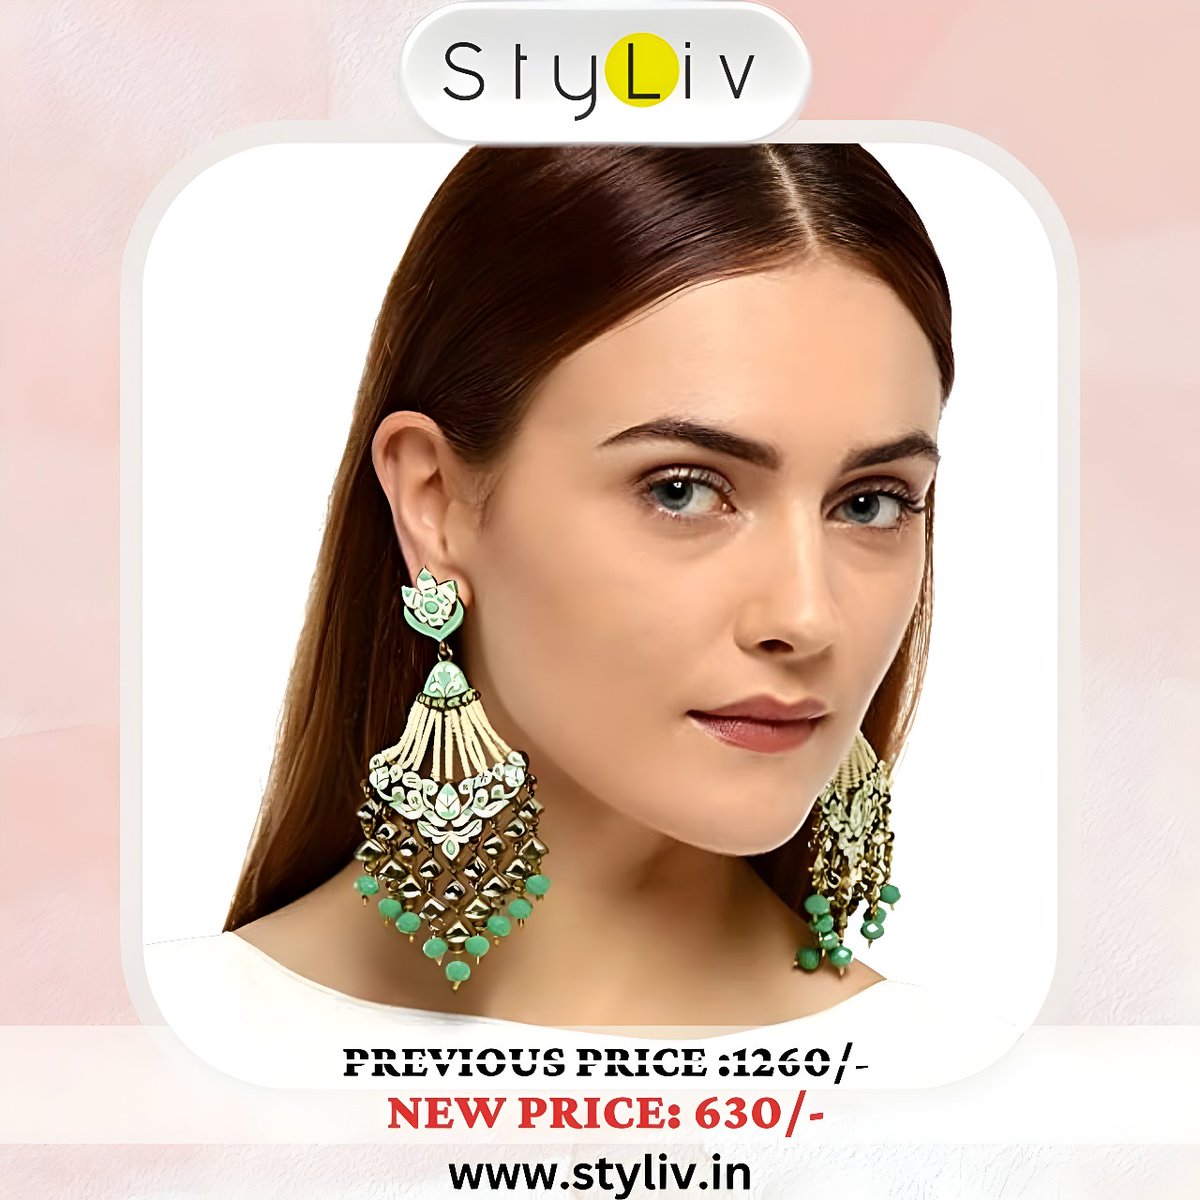 Dazzle yourself with these elegant kundon meenakari chandbalis
Previous Price :1260/-
New Price: 630/- 
styliv.in

#StylivDussehraSale
#FestiveFashion
#ElegantEarrings
#JewelrySale
#DazzlingChandbalis
#MeenakariMagic
#DiscountAlert
#FestiveJewelry
#FashionDeals